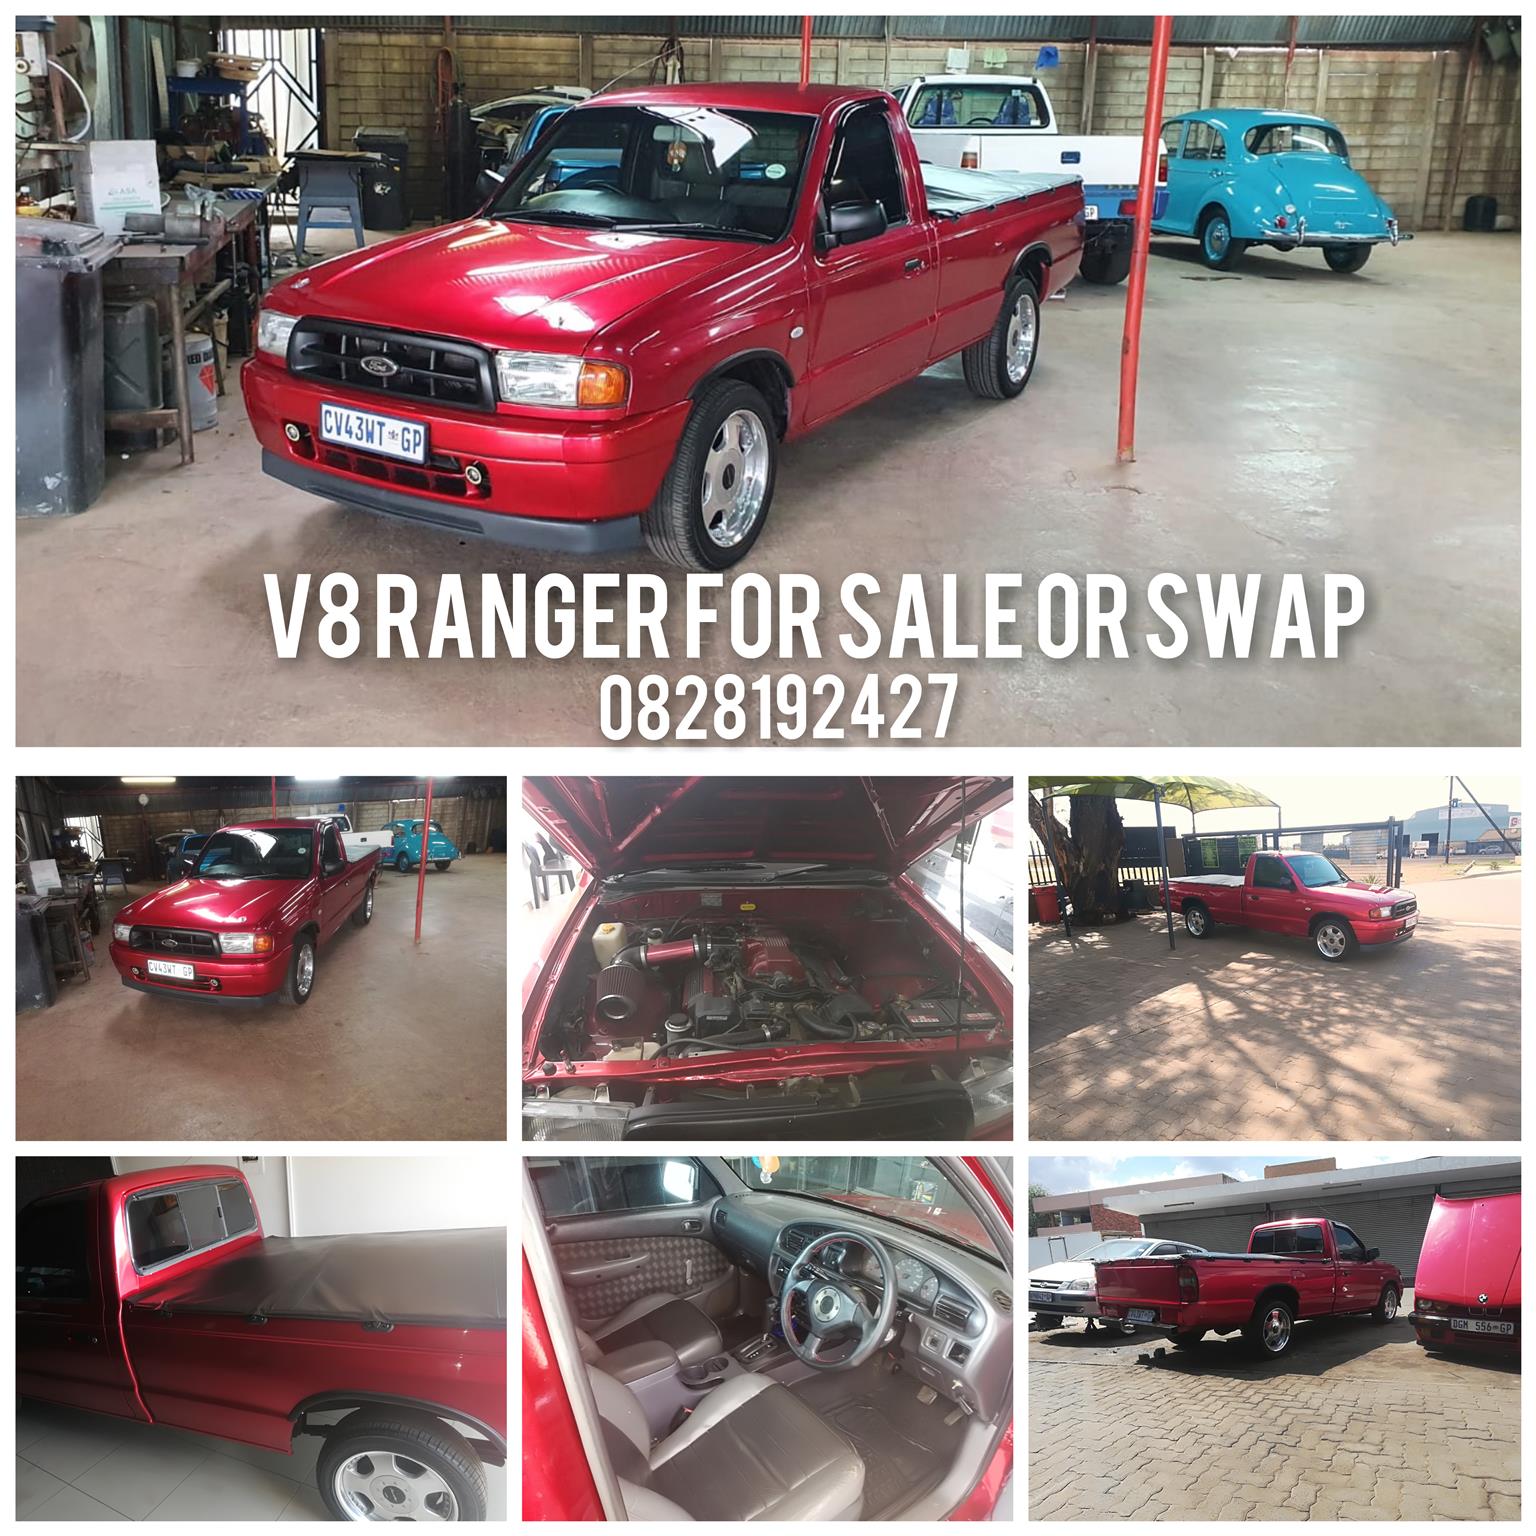 Ford Ranger for Sale or Swap 